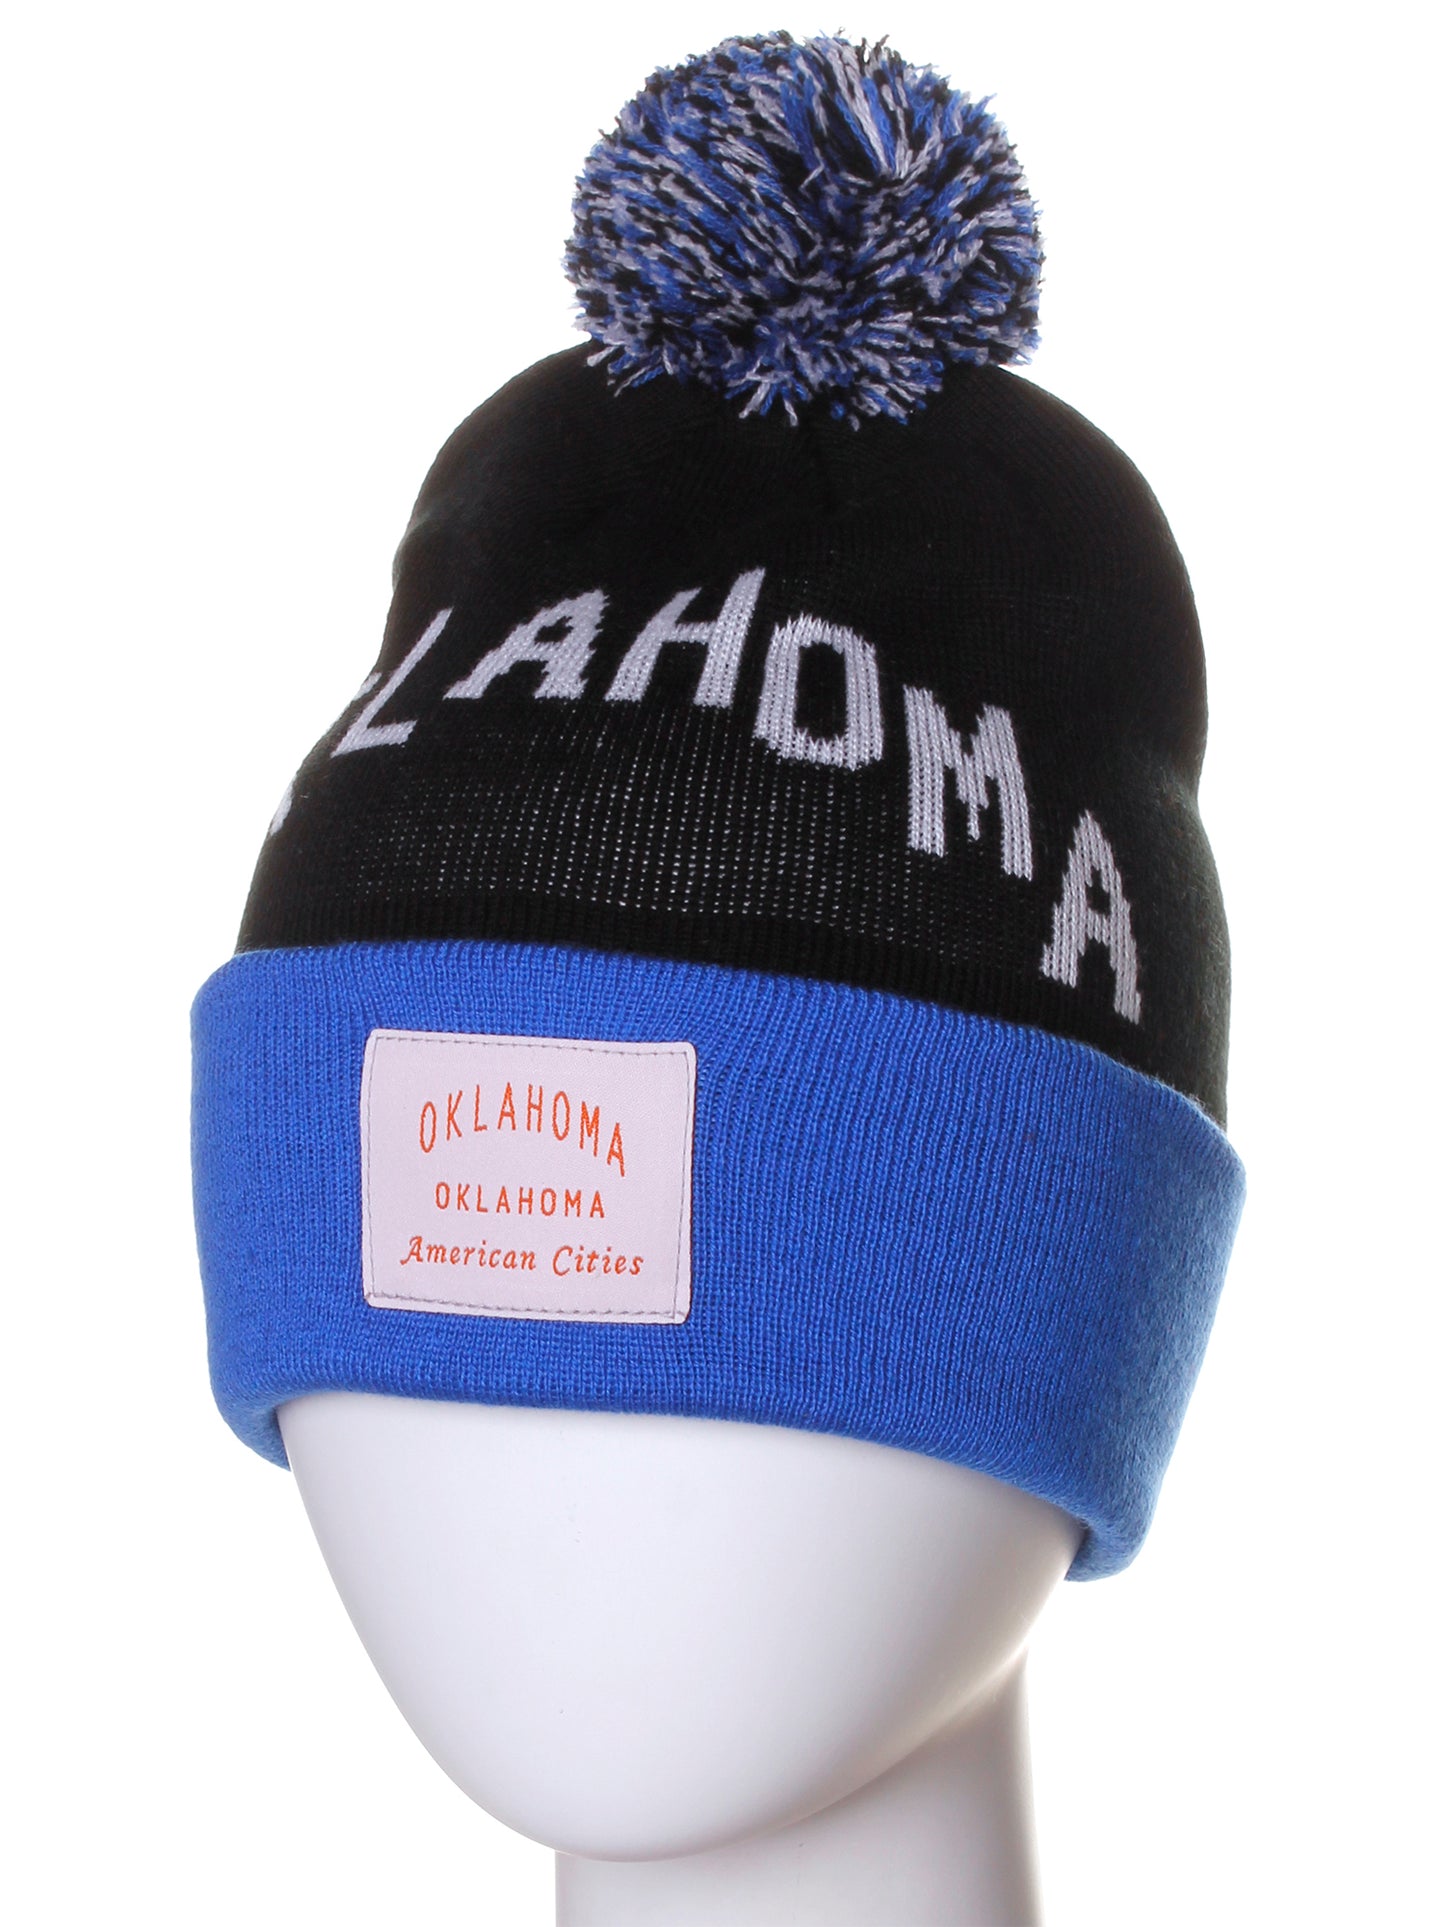 American Cities Oklahoma Arch Letters Pom Pom Knit Hat Cap Beanie